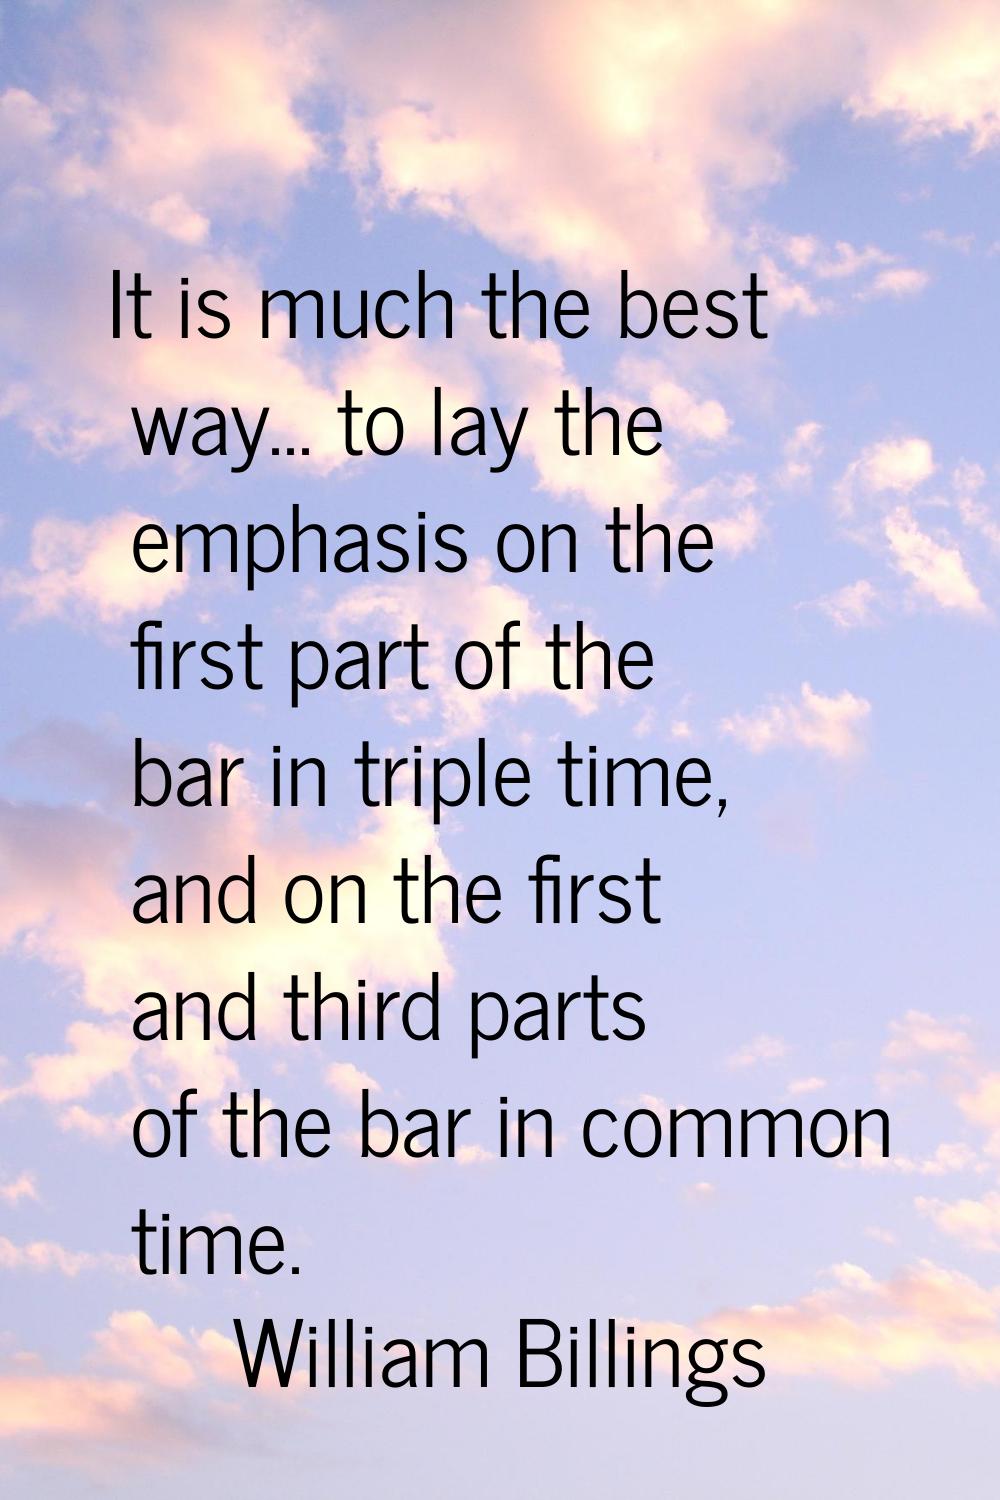 It is much the best way... to lay the emphasis on the first part of the bar in triple time, and on 